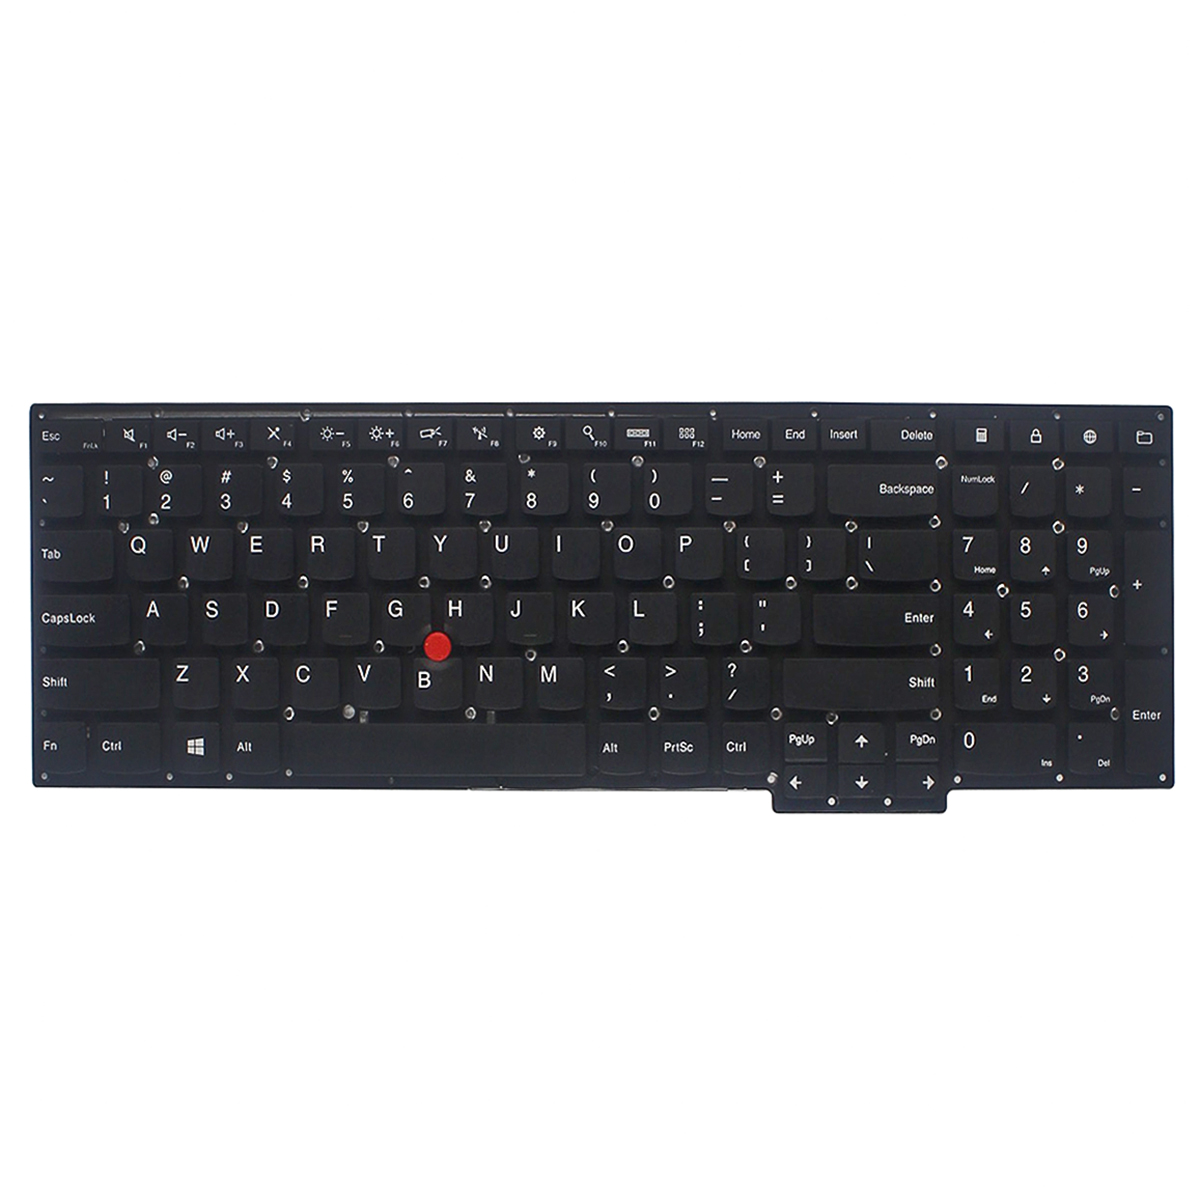 New Keyboard for Lenovo ThinkPad S5 S531 S540 Laptop with Pointe